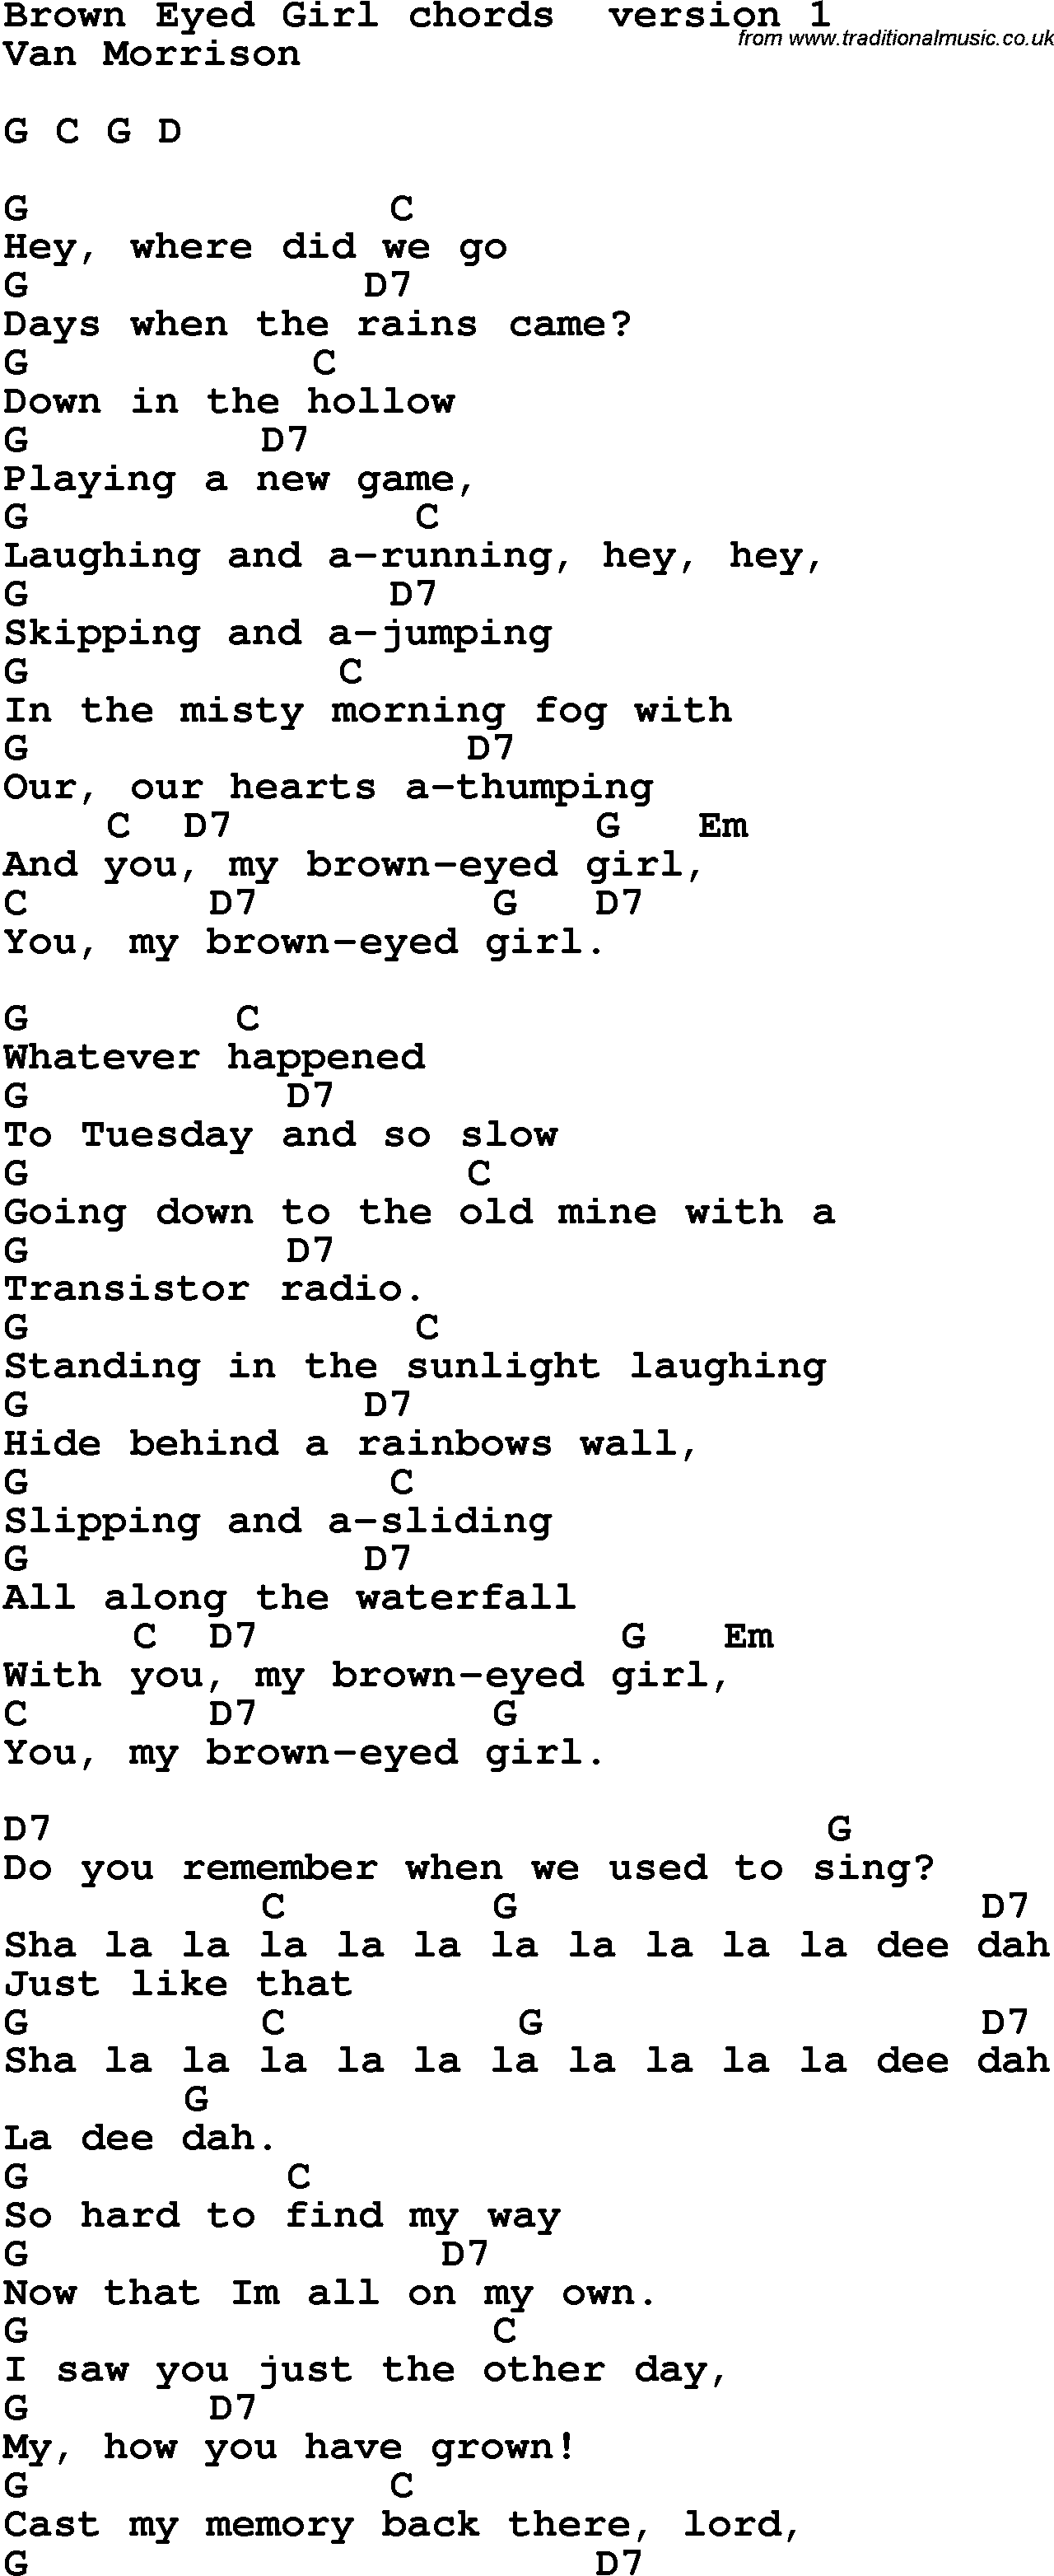 Song Lyrics with guitar chords for Brown Eyed Girl